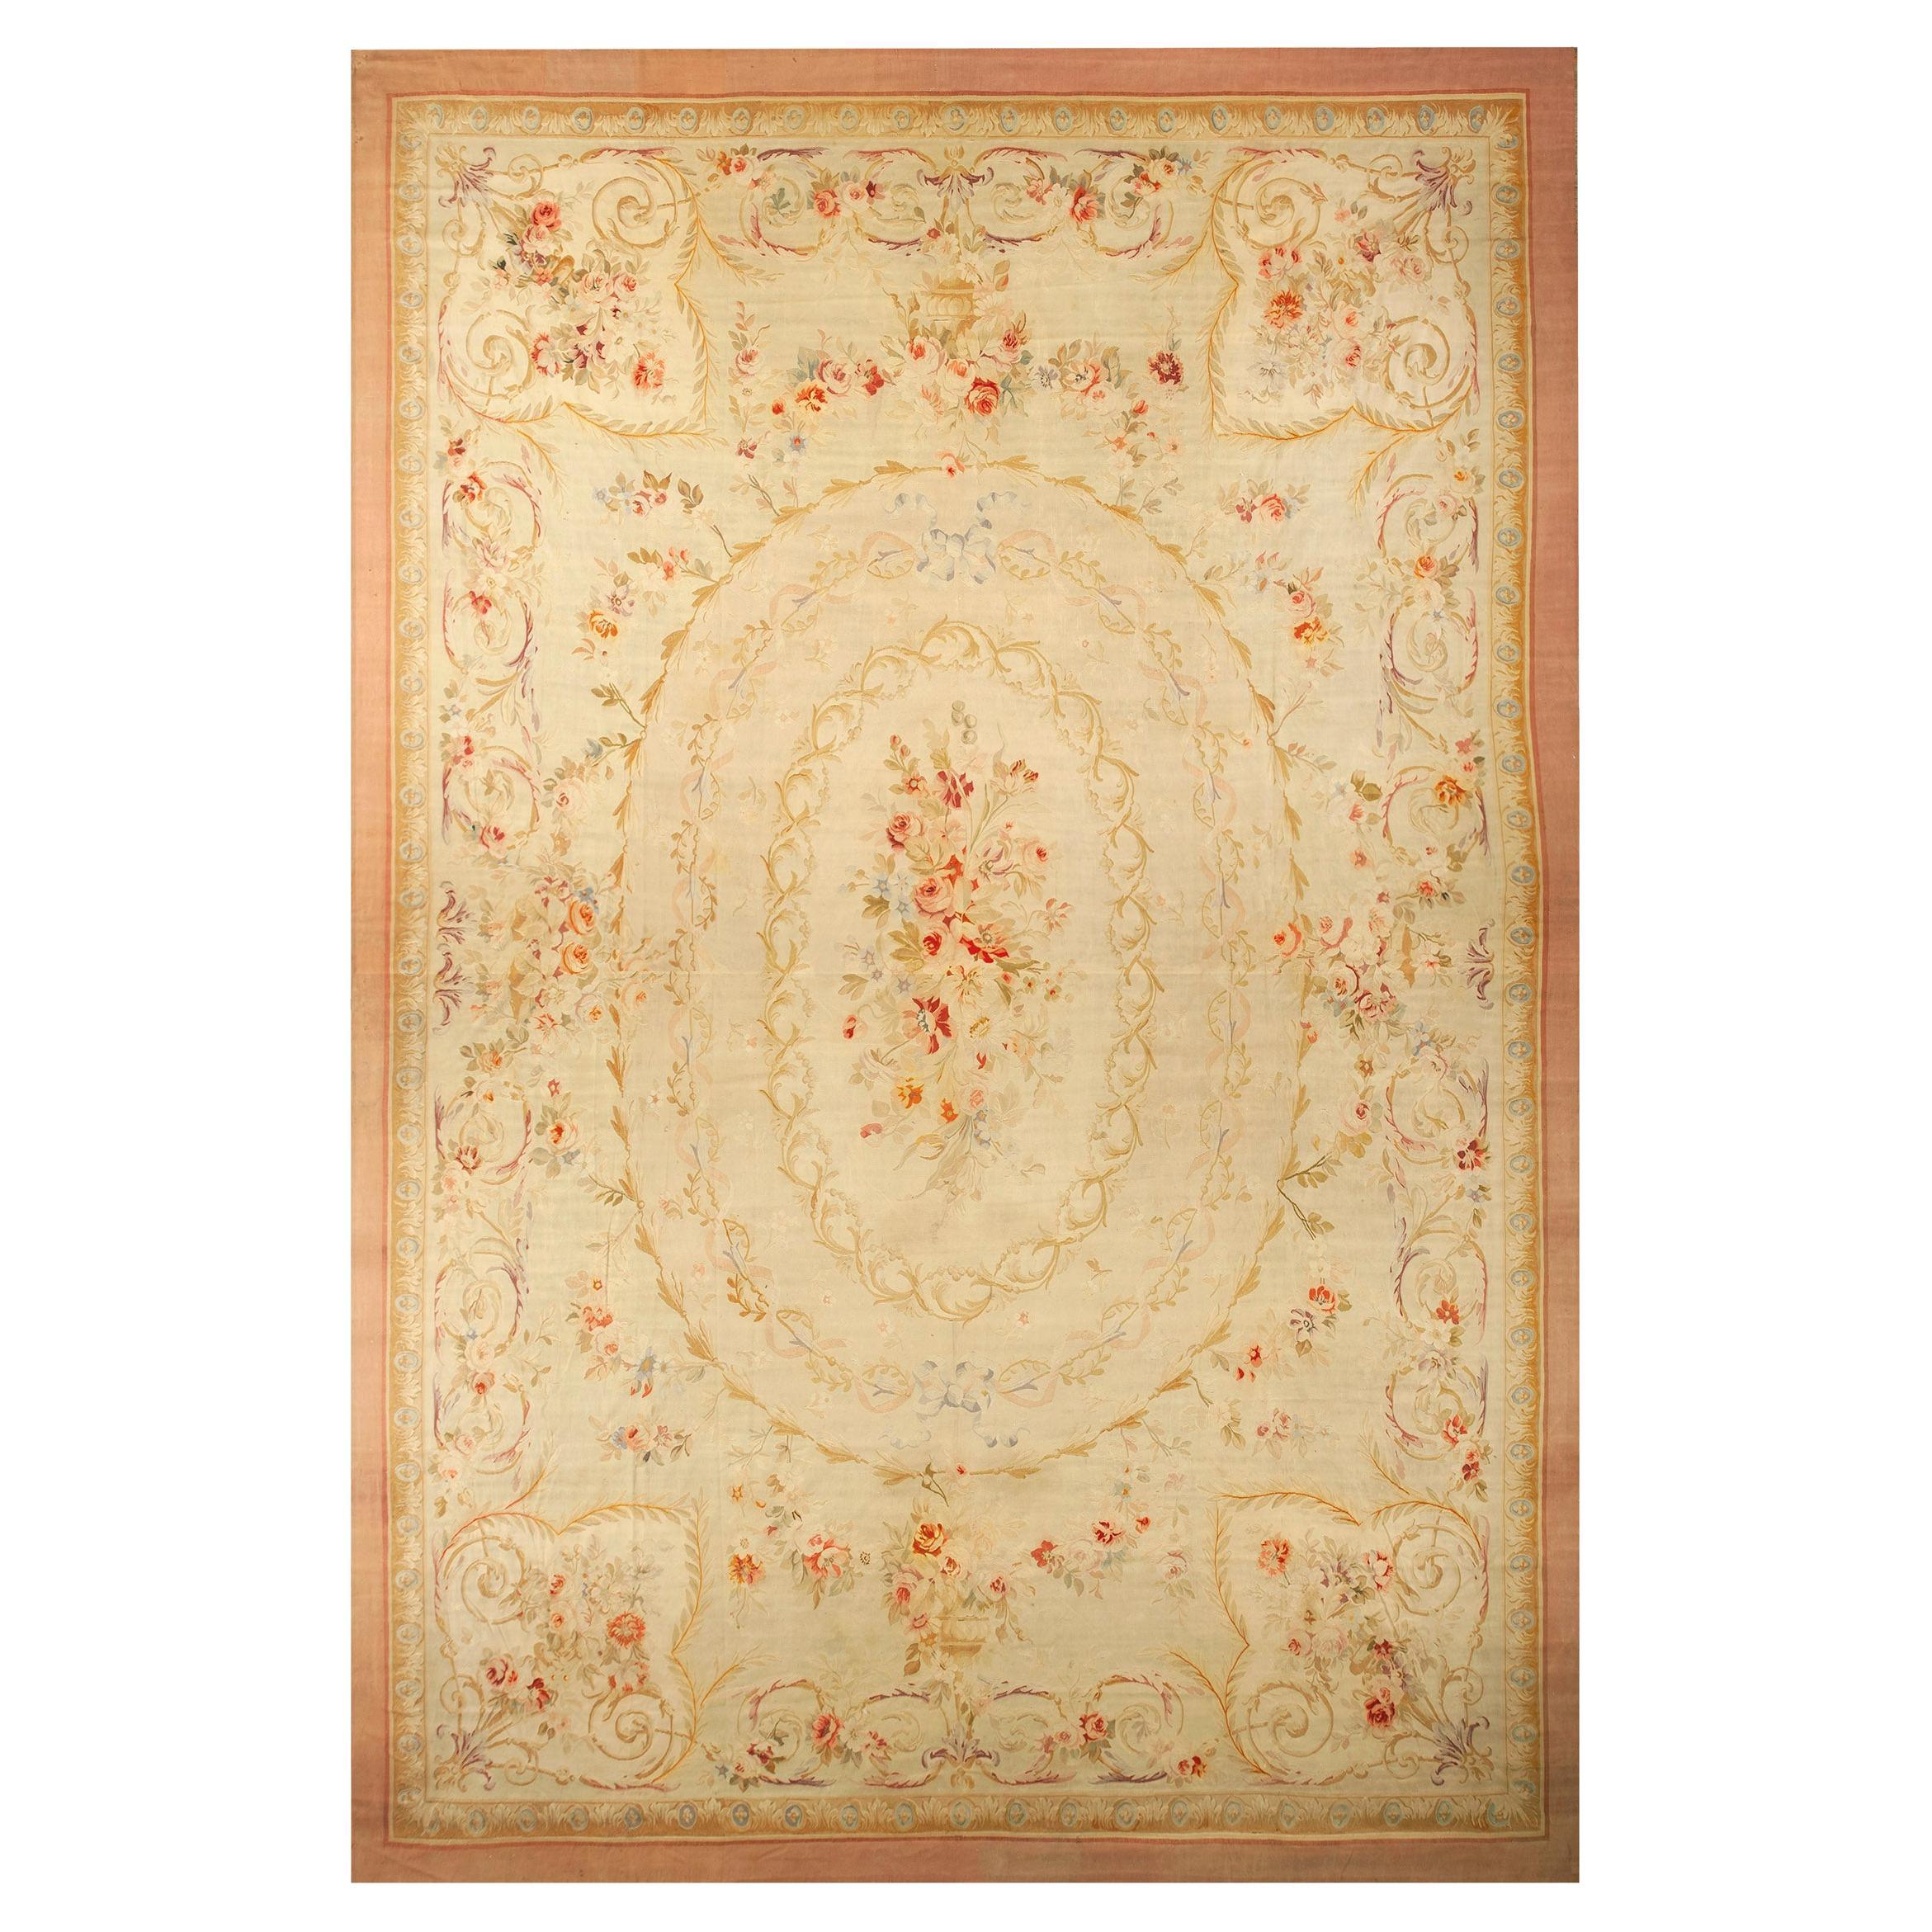 Early 20th Century French Aubusson Carpet ( 14'5' x 20'9'' - 440 x 633 )